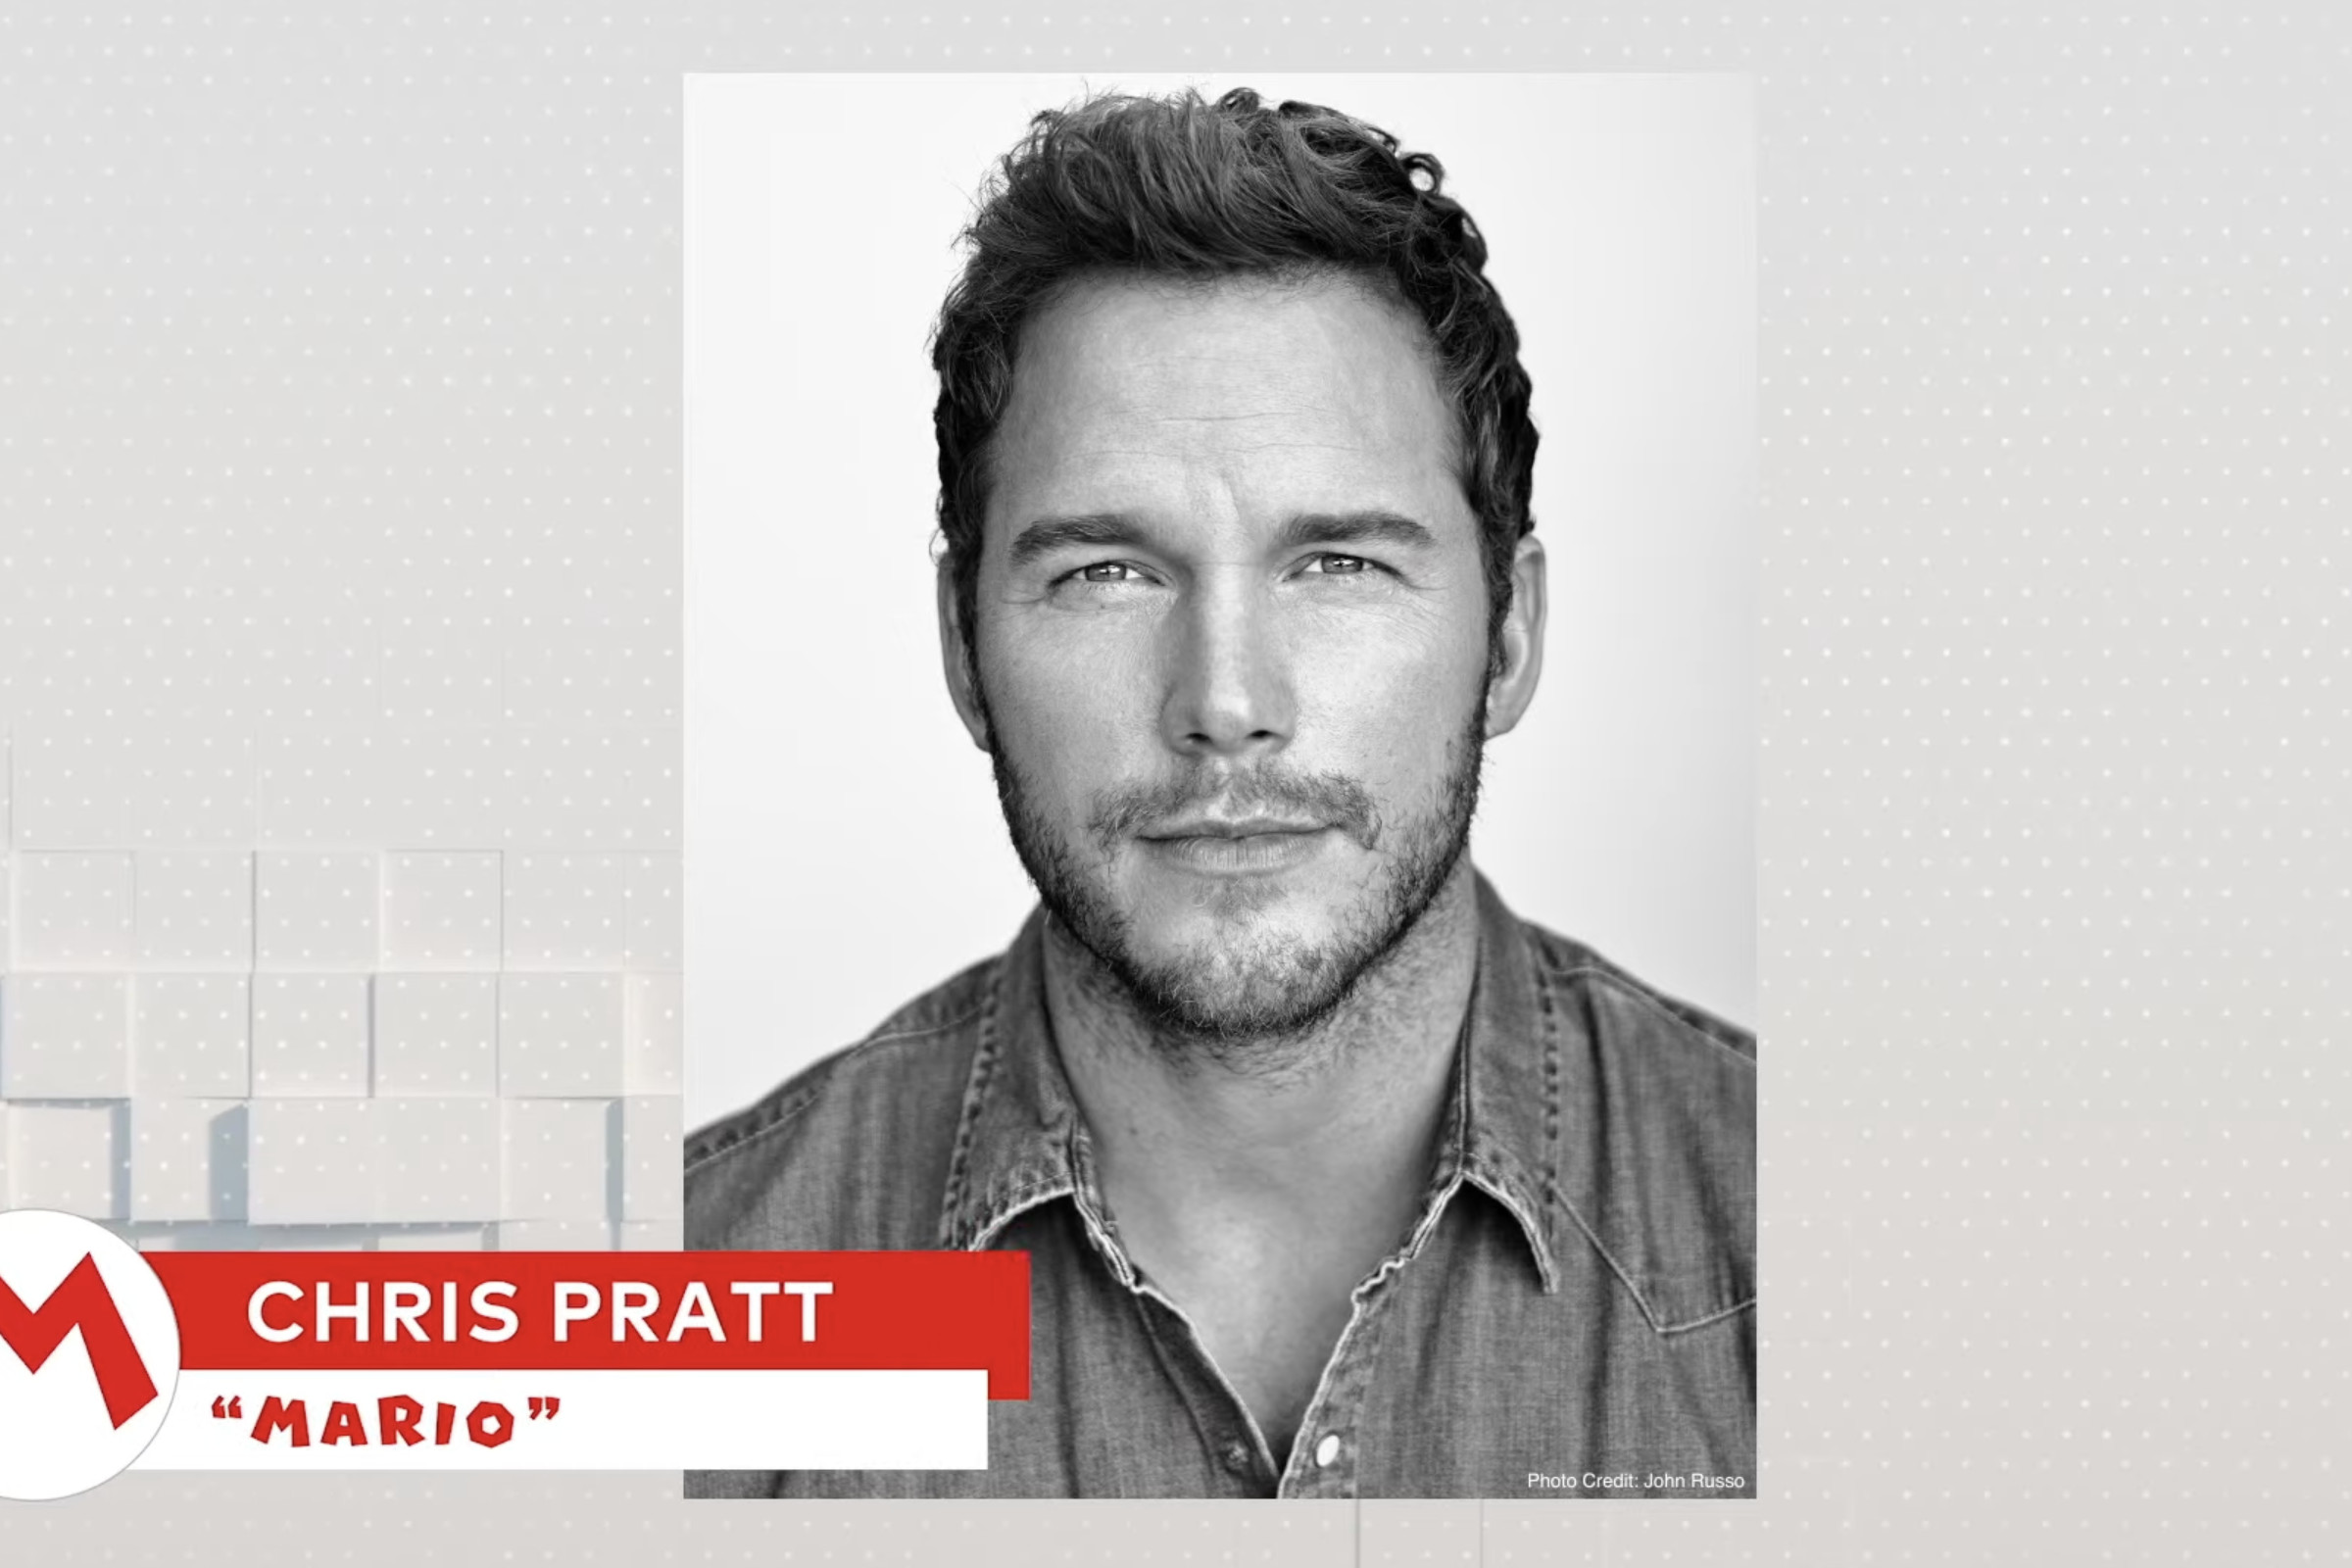 Chris Pratt’s black and white headshot is behind a small notice saying that he will be starring as Mario in the Mario movie.